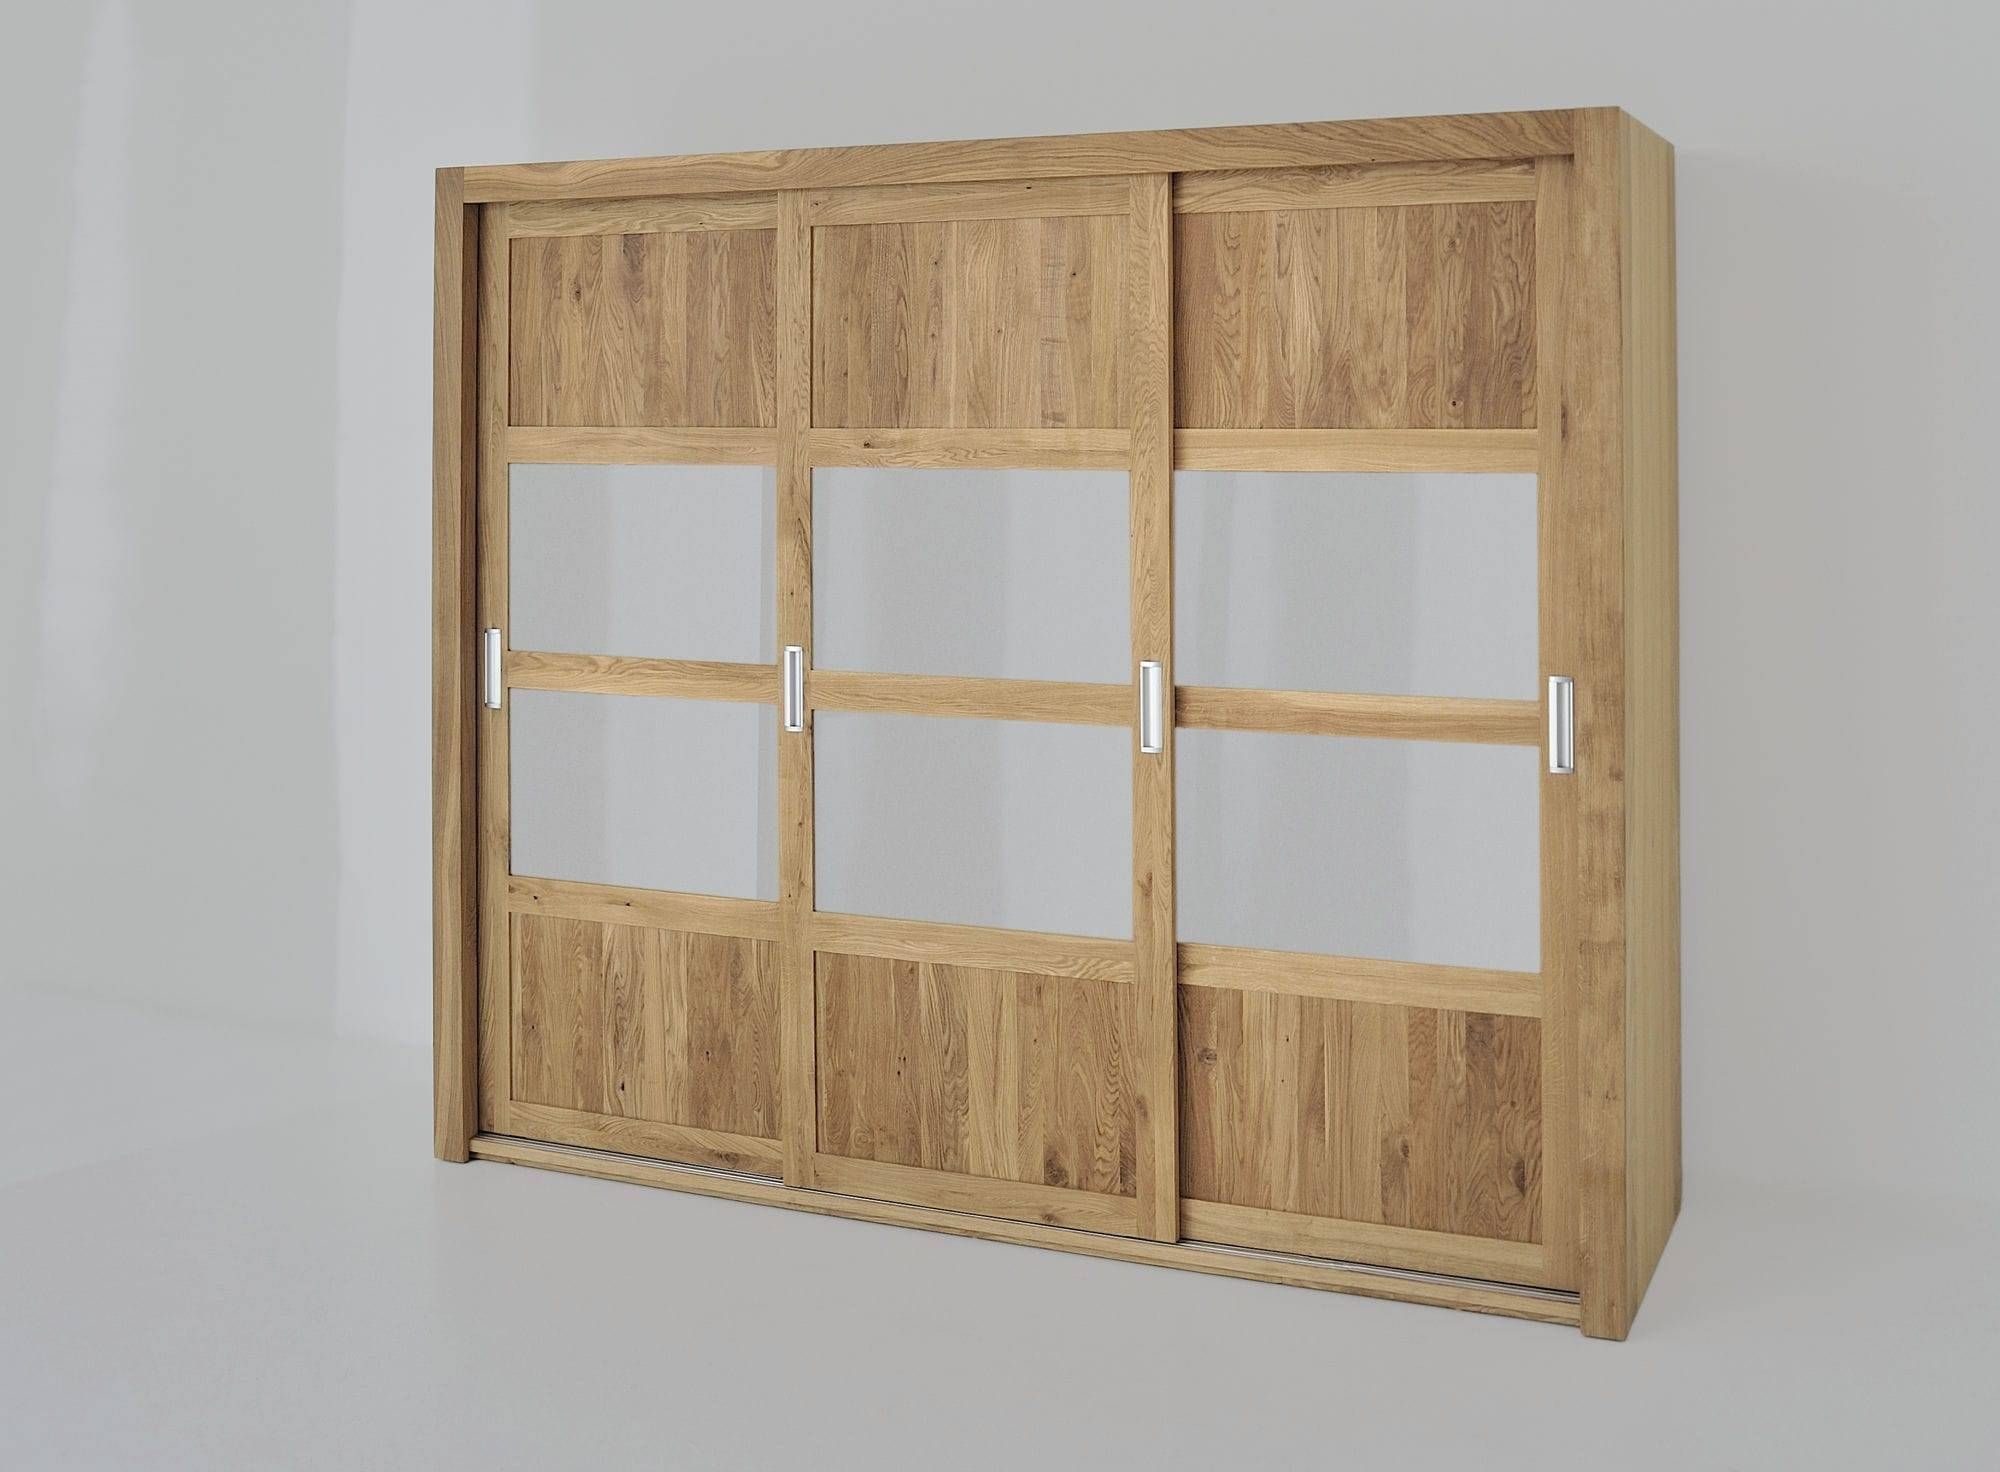 Contemporary Wardrobe / Solid Wood / With Sliding Door / Mirrored Intended For Solid Wood Fitted Wardrobe Doors (View 12 of 30)